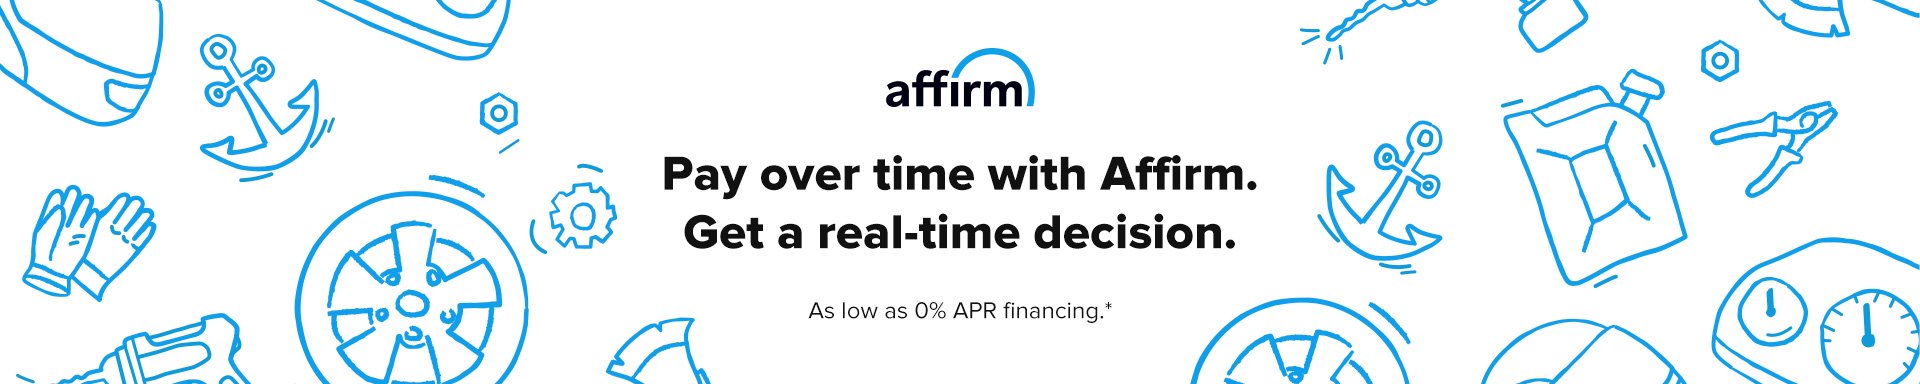 Affirm | Easy Financing | Pay Later with Affirm - CARiD.com